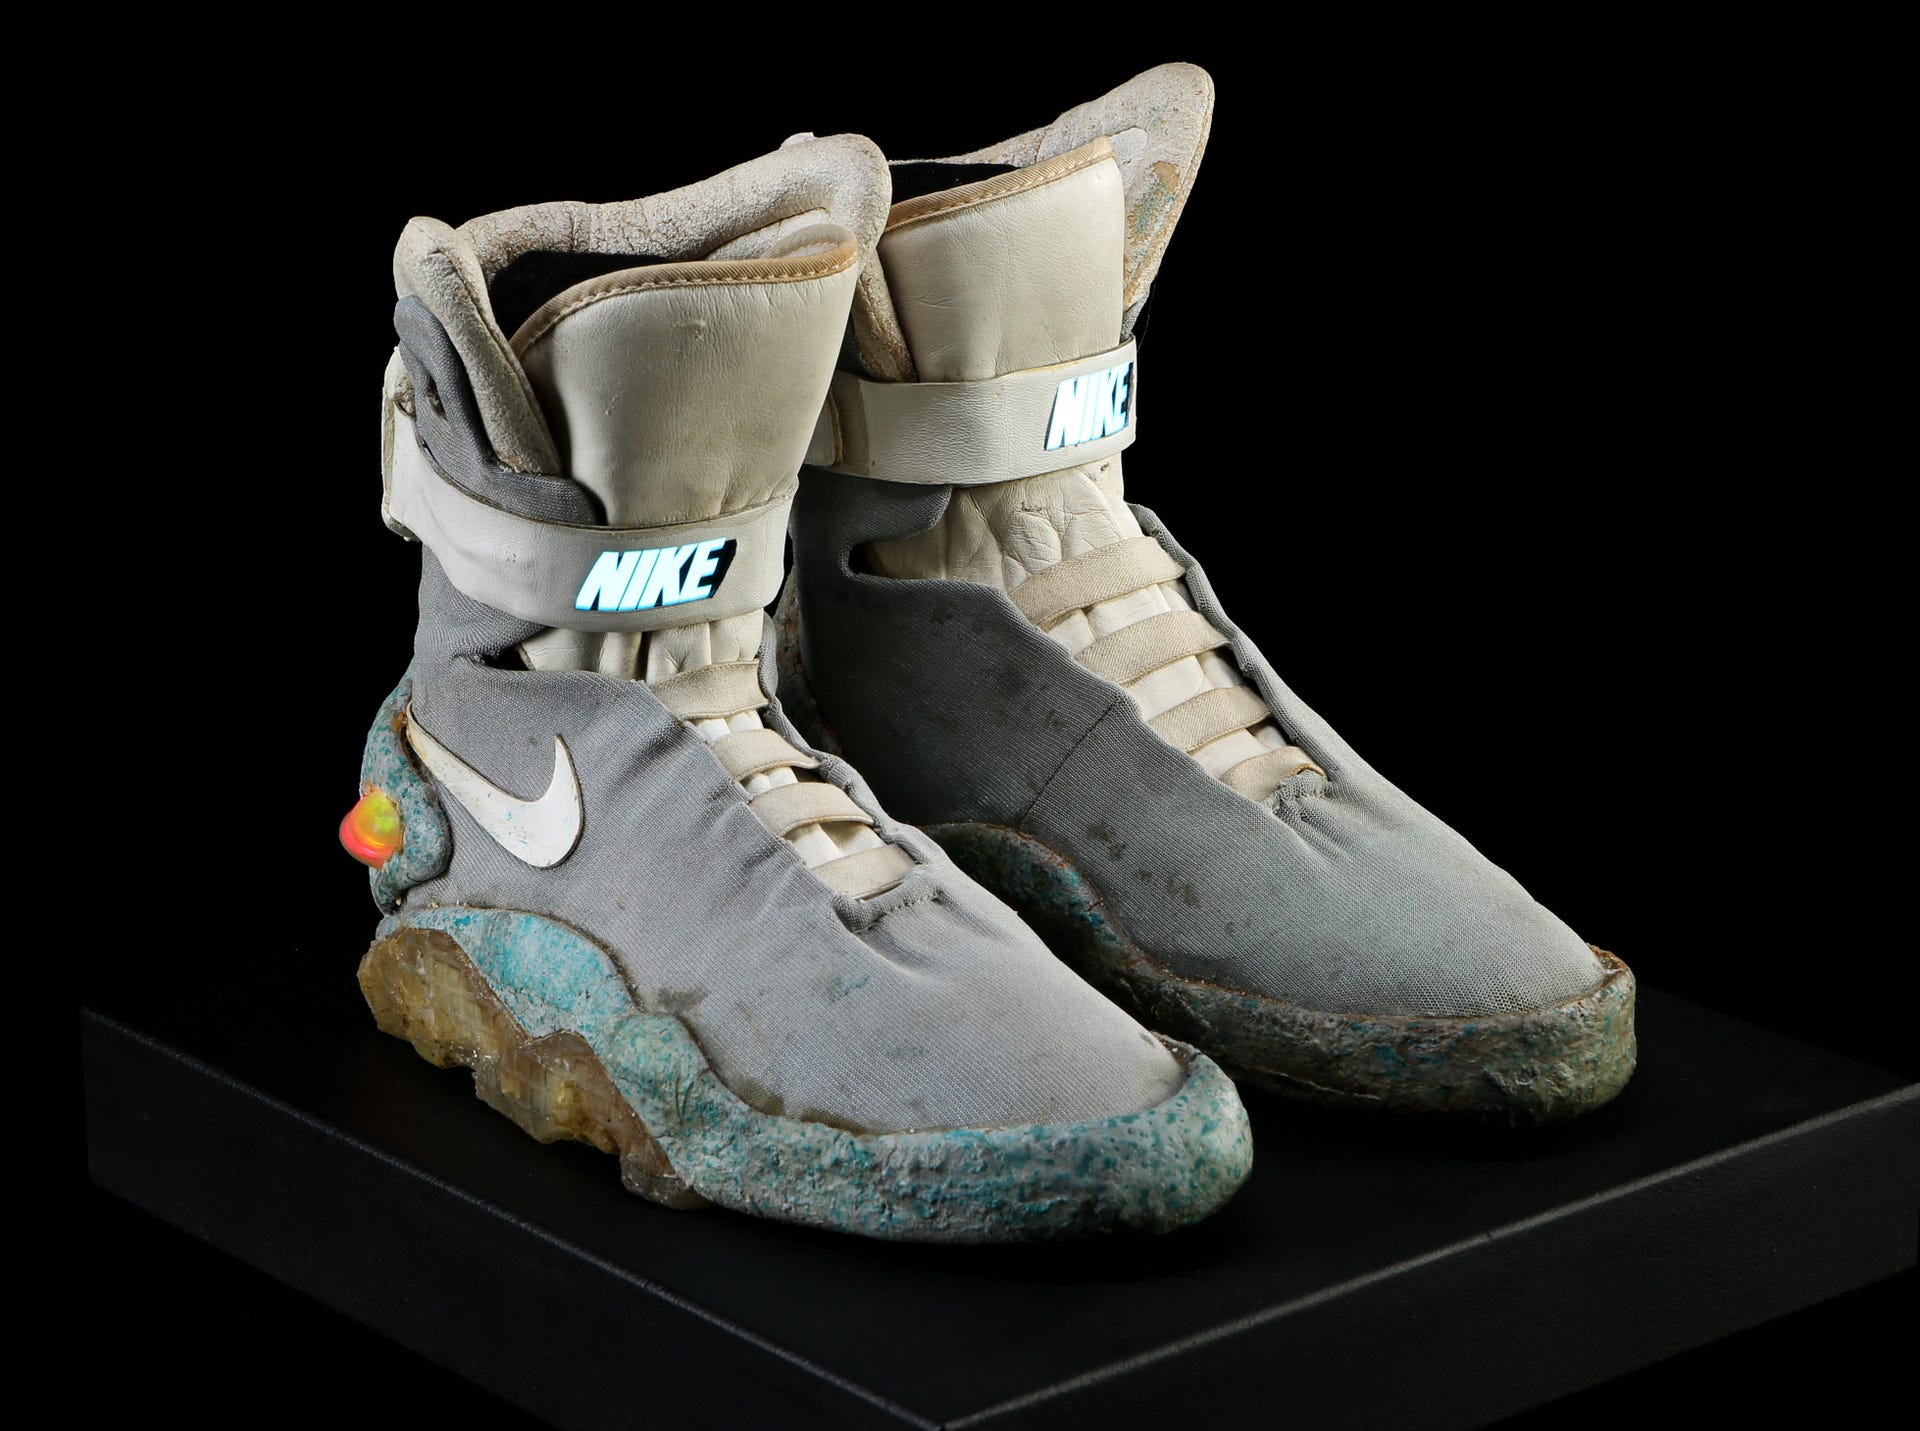 Back to the Nike Mag shoes can be yours - CNET